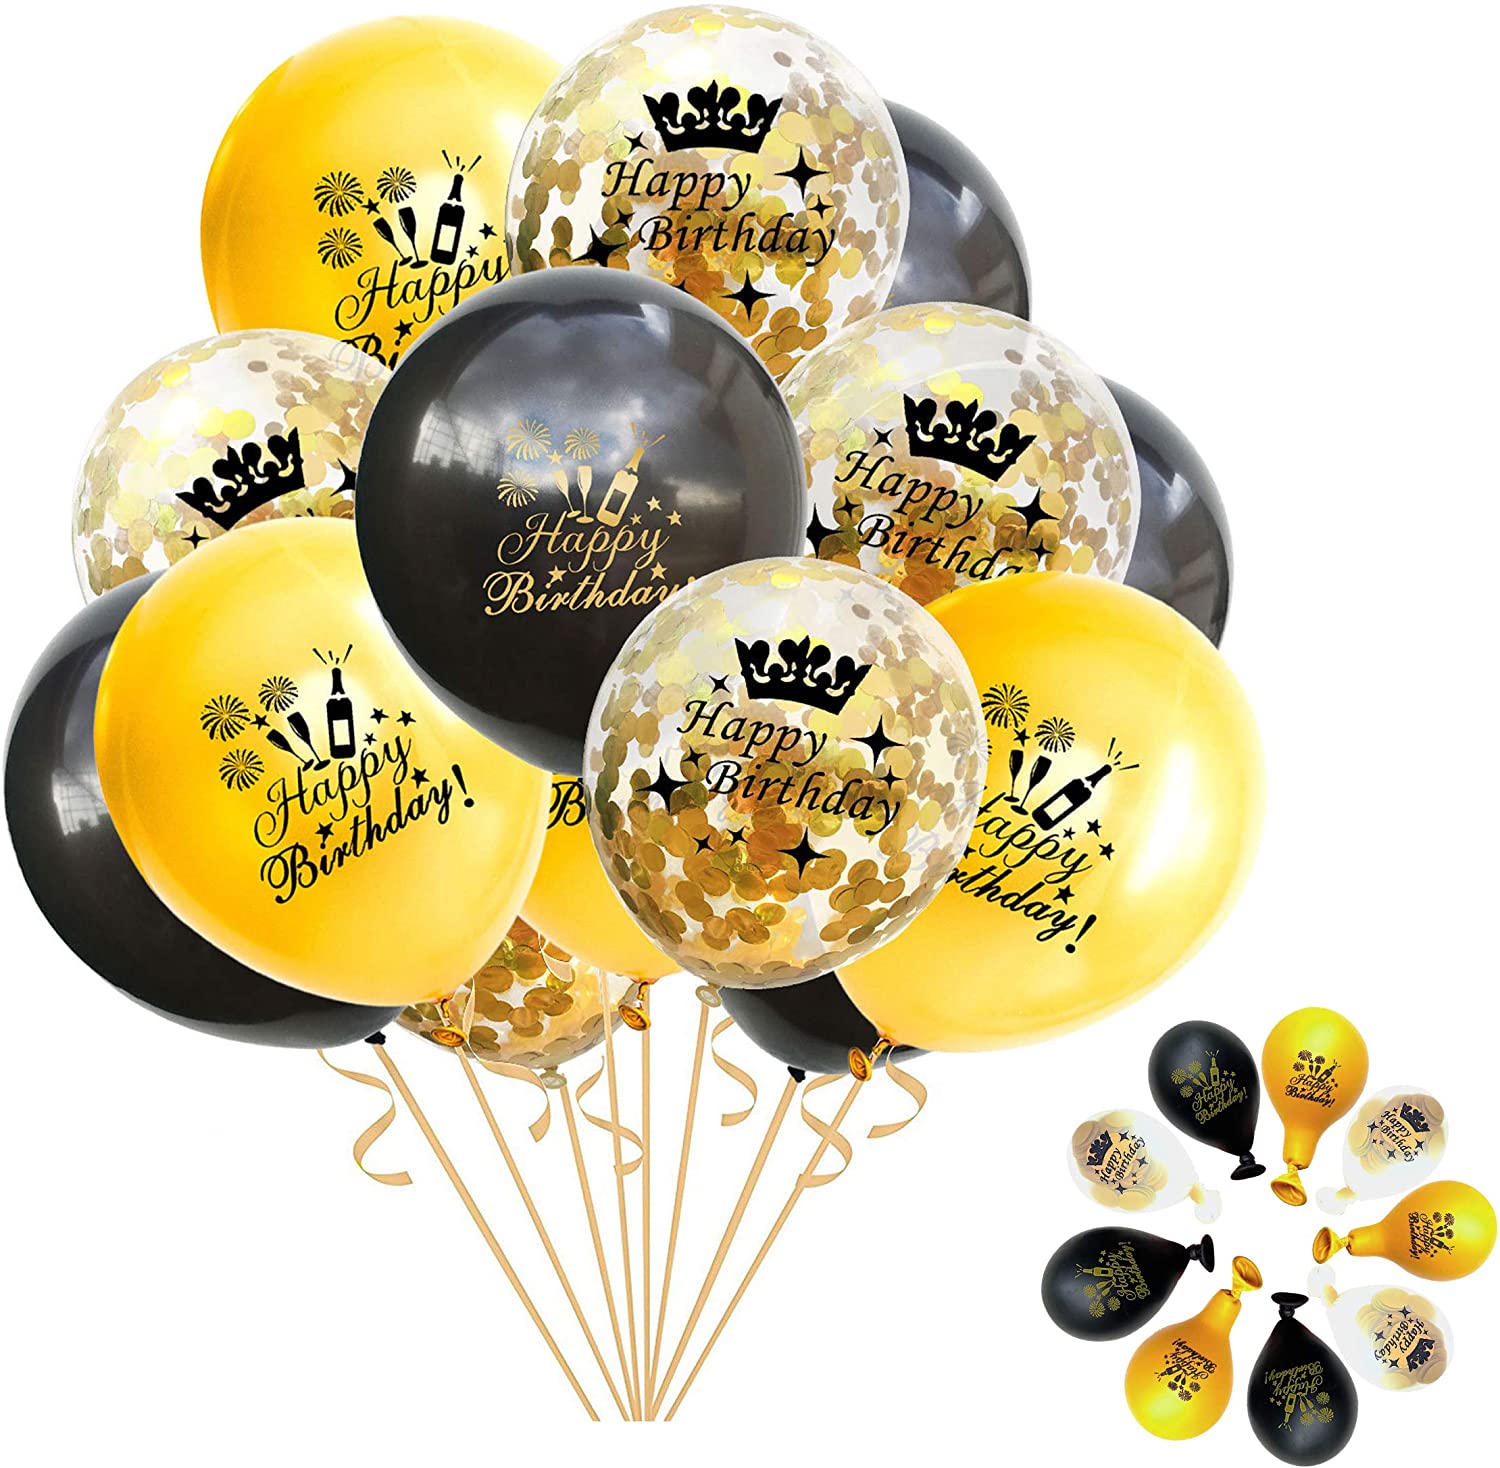 Happy Birthday Balloons Gold and Black Party Decorations 15 Pack 12 inch Latex and Confetti Balloon